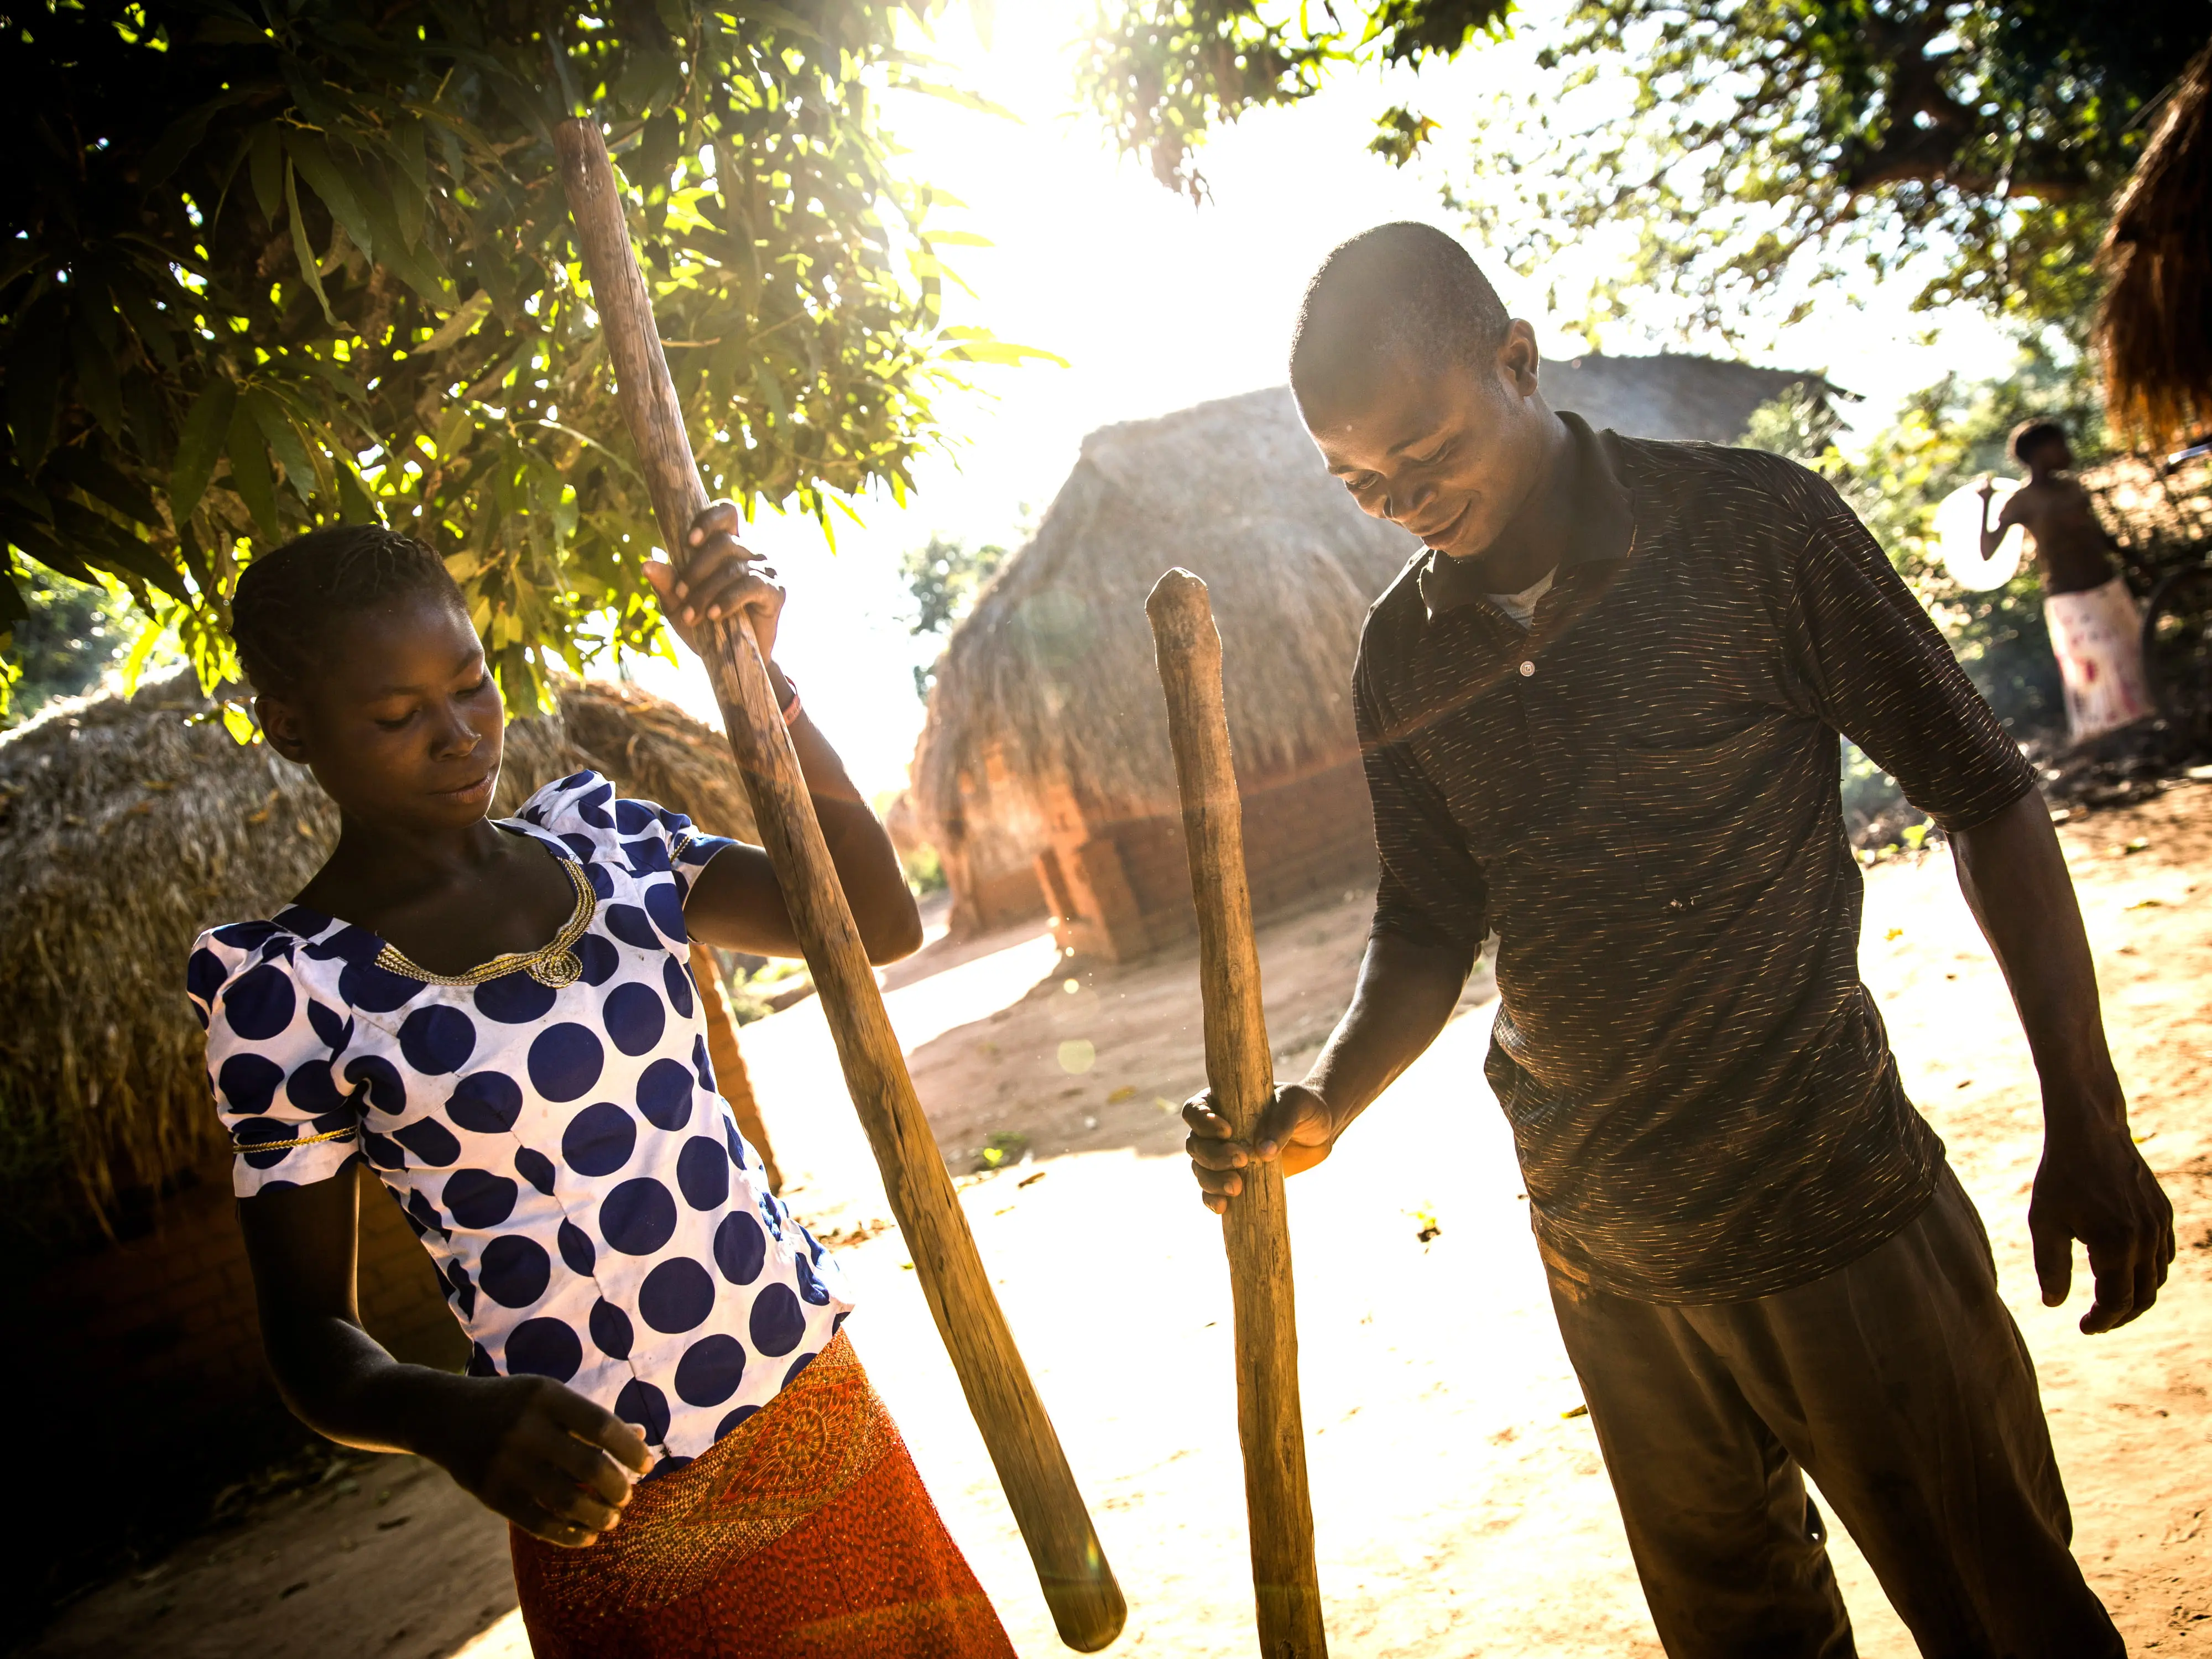 George Mukaly Ngoyi, 31, and Natalie Ngoyi, 20, prepare cassava flour together in the town of Pension, Manono Territory.